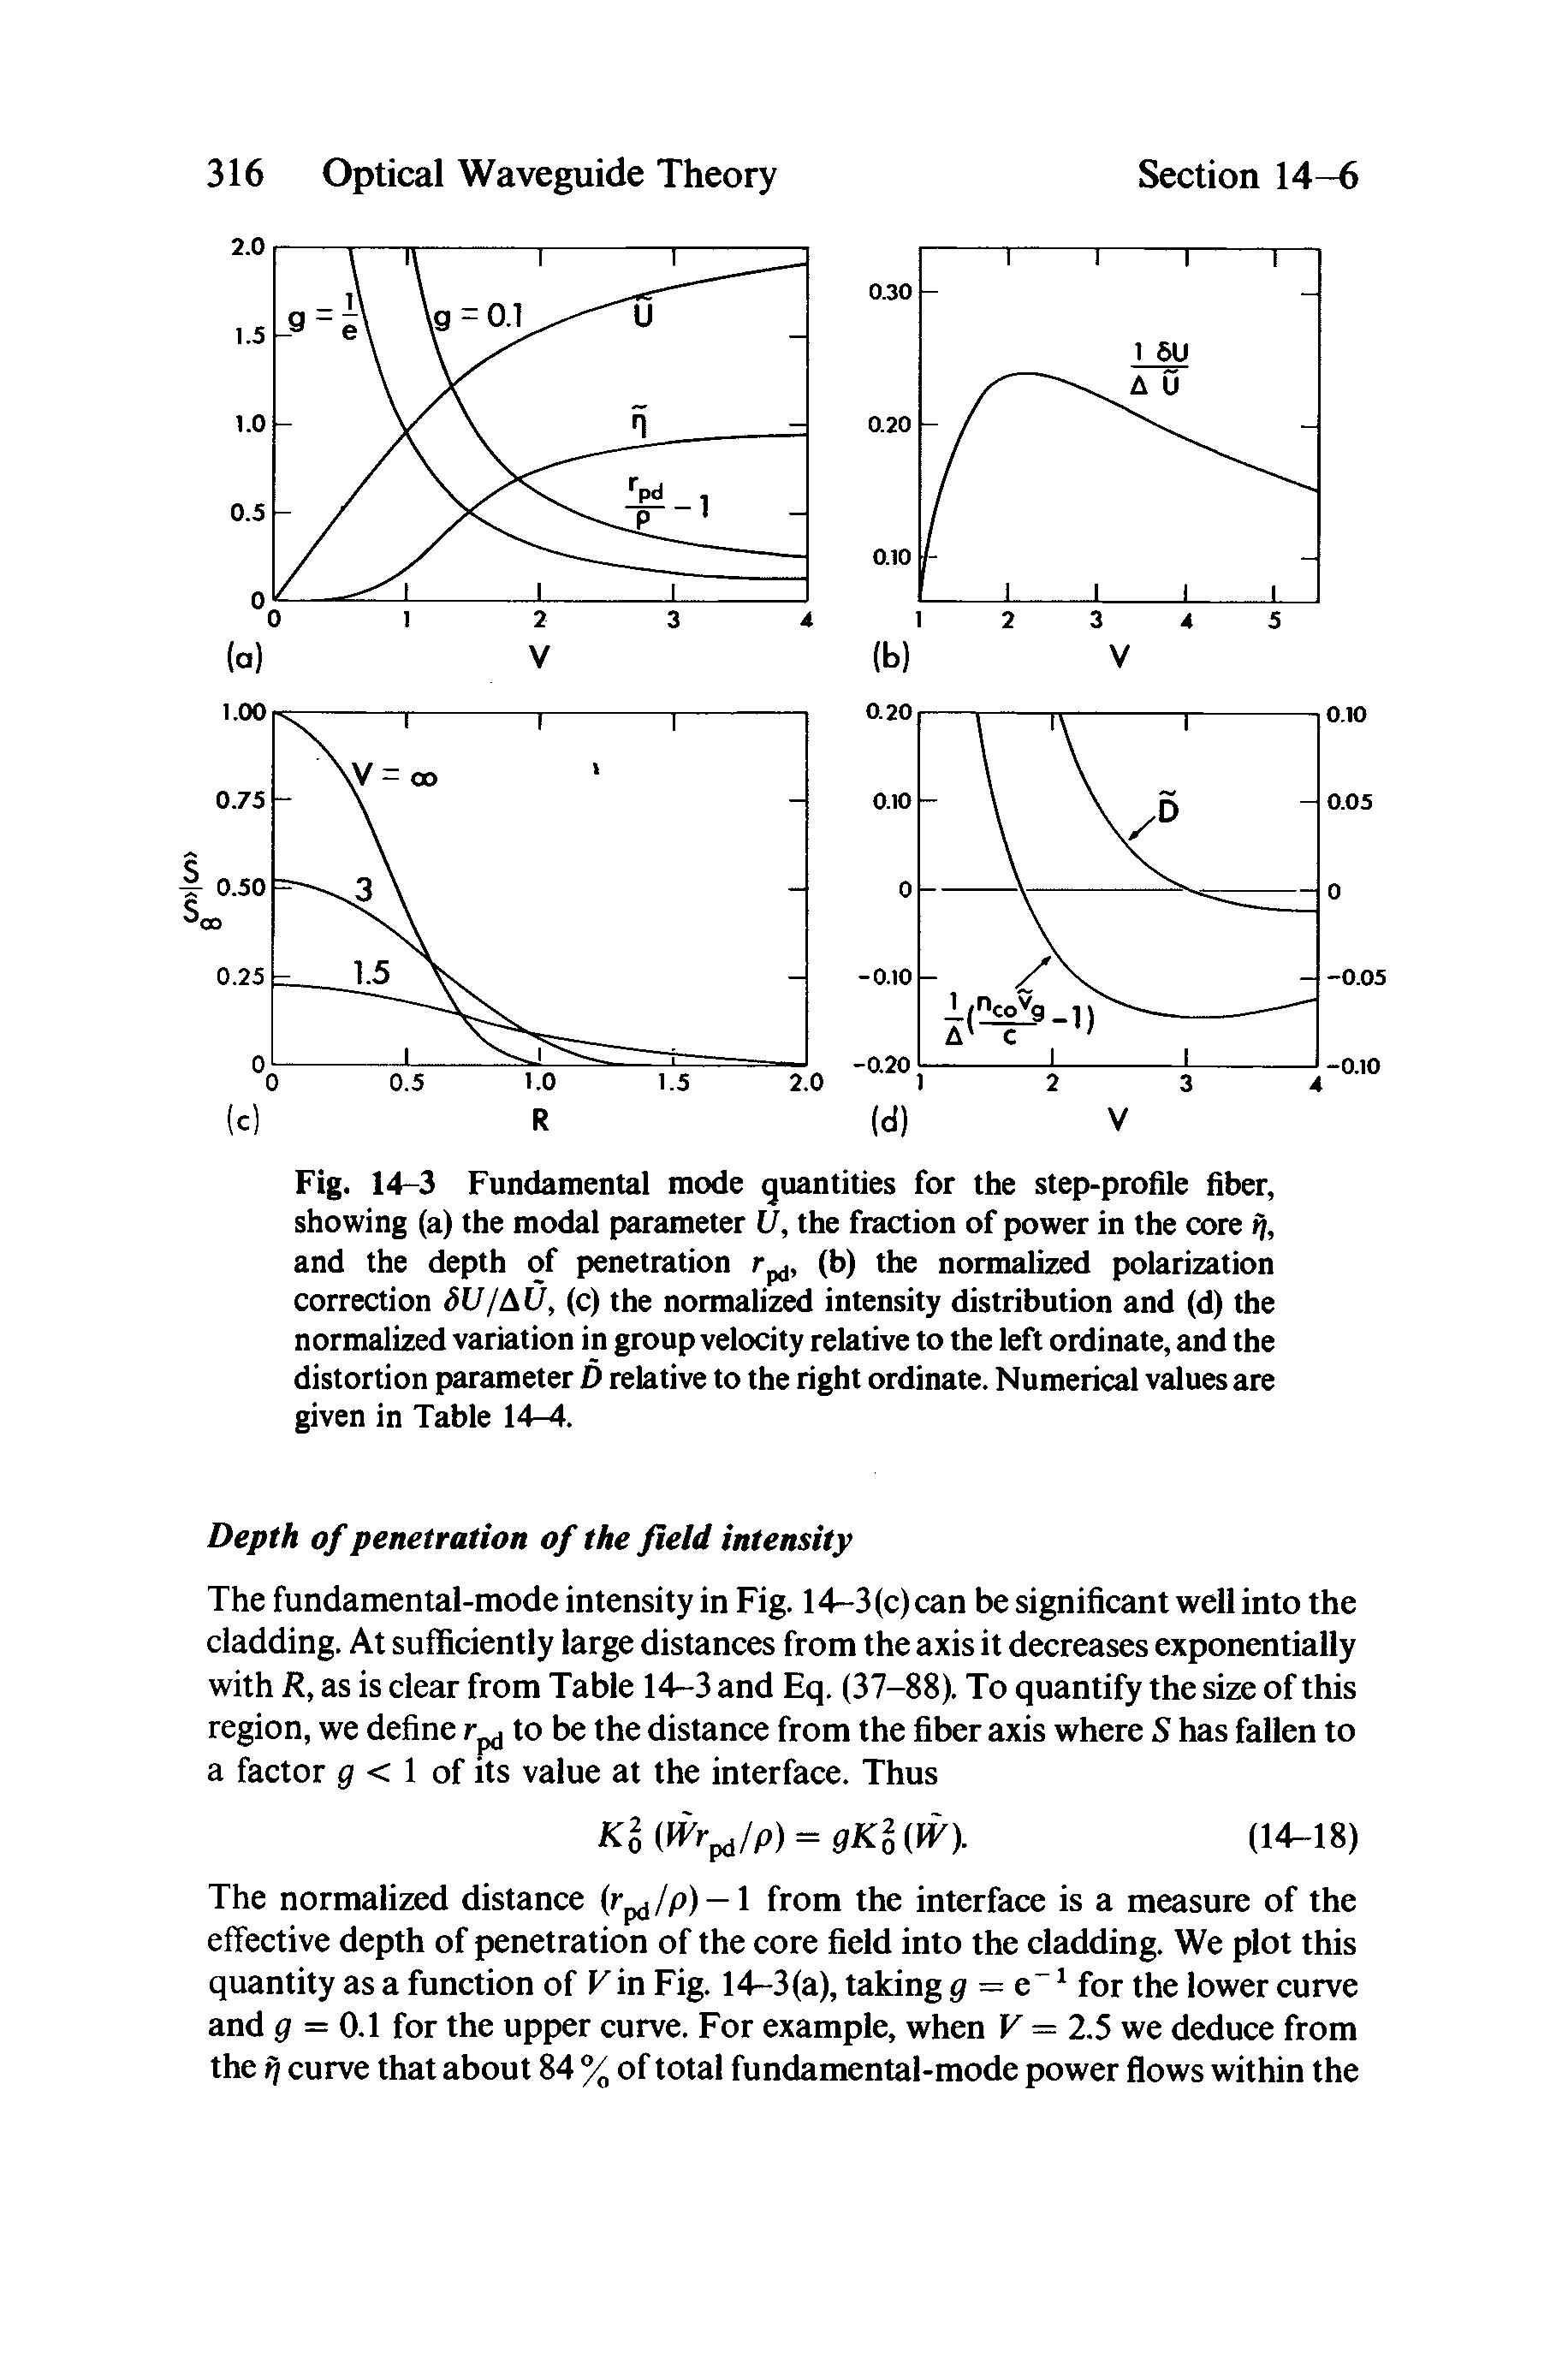 Fig. 14-3 Fundamental mode quantities for the step-profile fiber, showing (a) the modal parameter U, the fraction of power in the core fj, and the depth of penetration r, (b) the normalized polarization correction SU/AU, (c) the normalized intensity distribution and (d) the normalized variation in group velocity relative to the left ordinate, and the distortion parameter D relative to the right ordinate. Numerical values are given in Table 14-4.